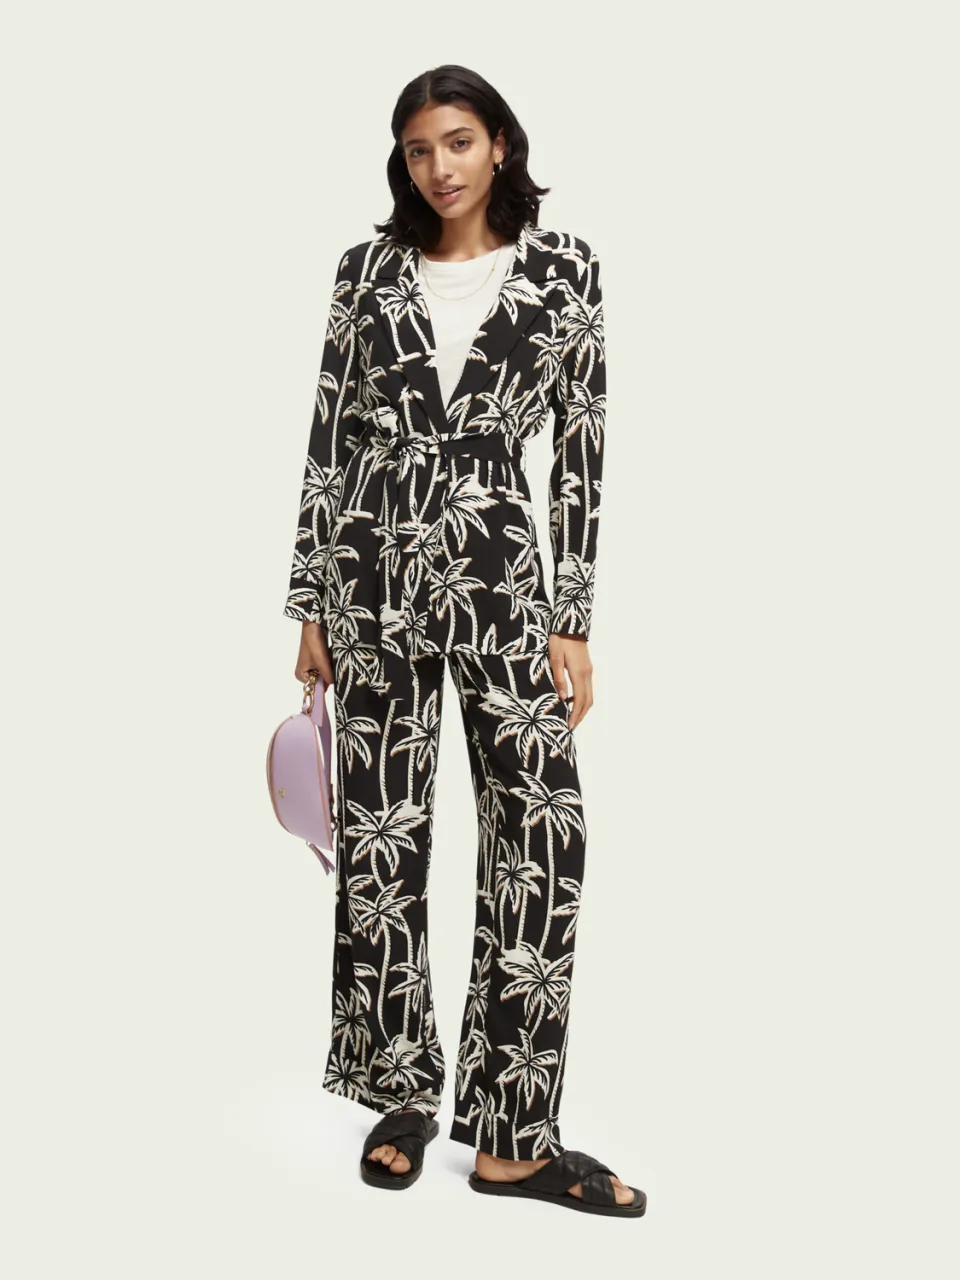 Stylish Wedding Pantsuits For Women And Nonbinary People | HuffPost Life